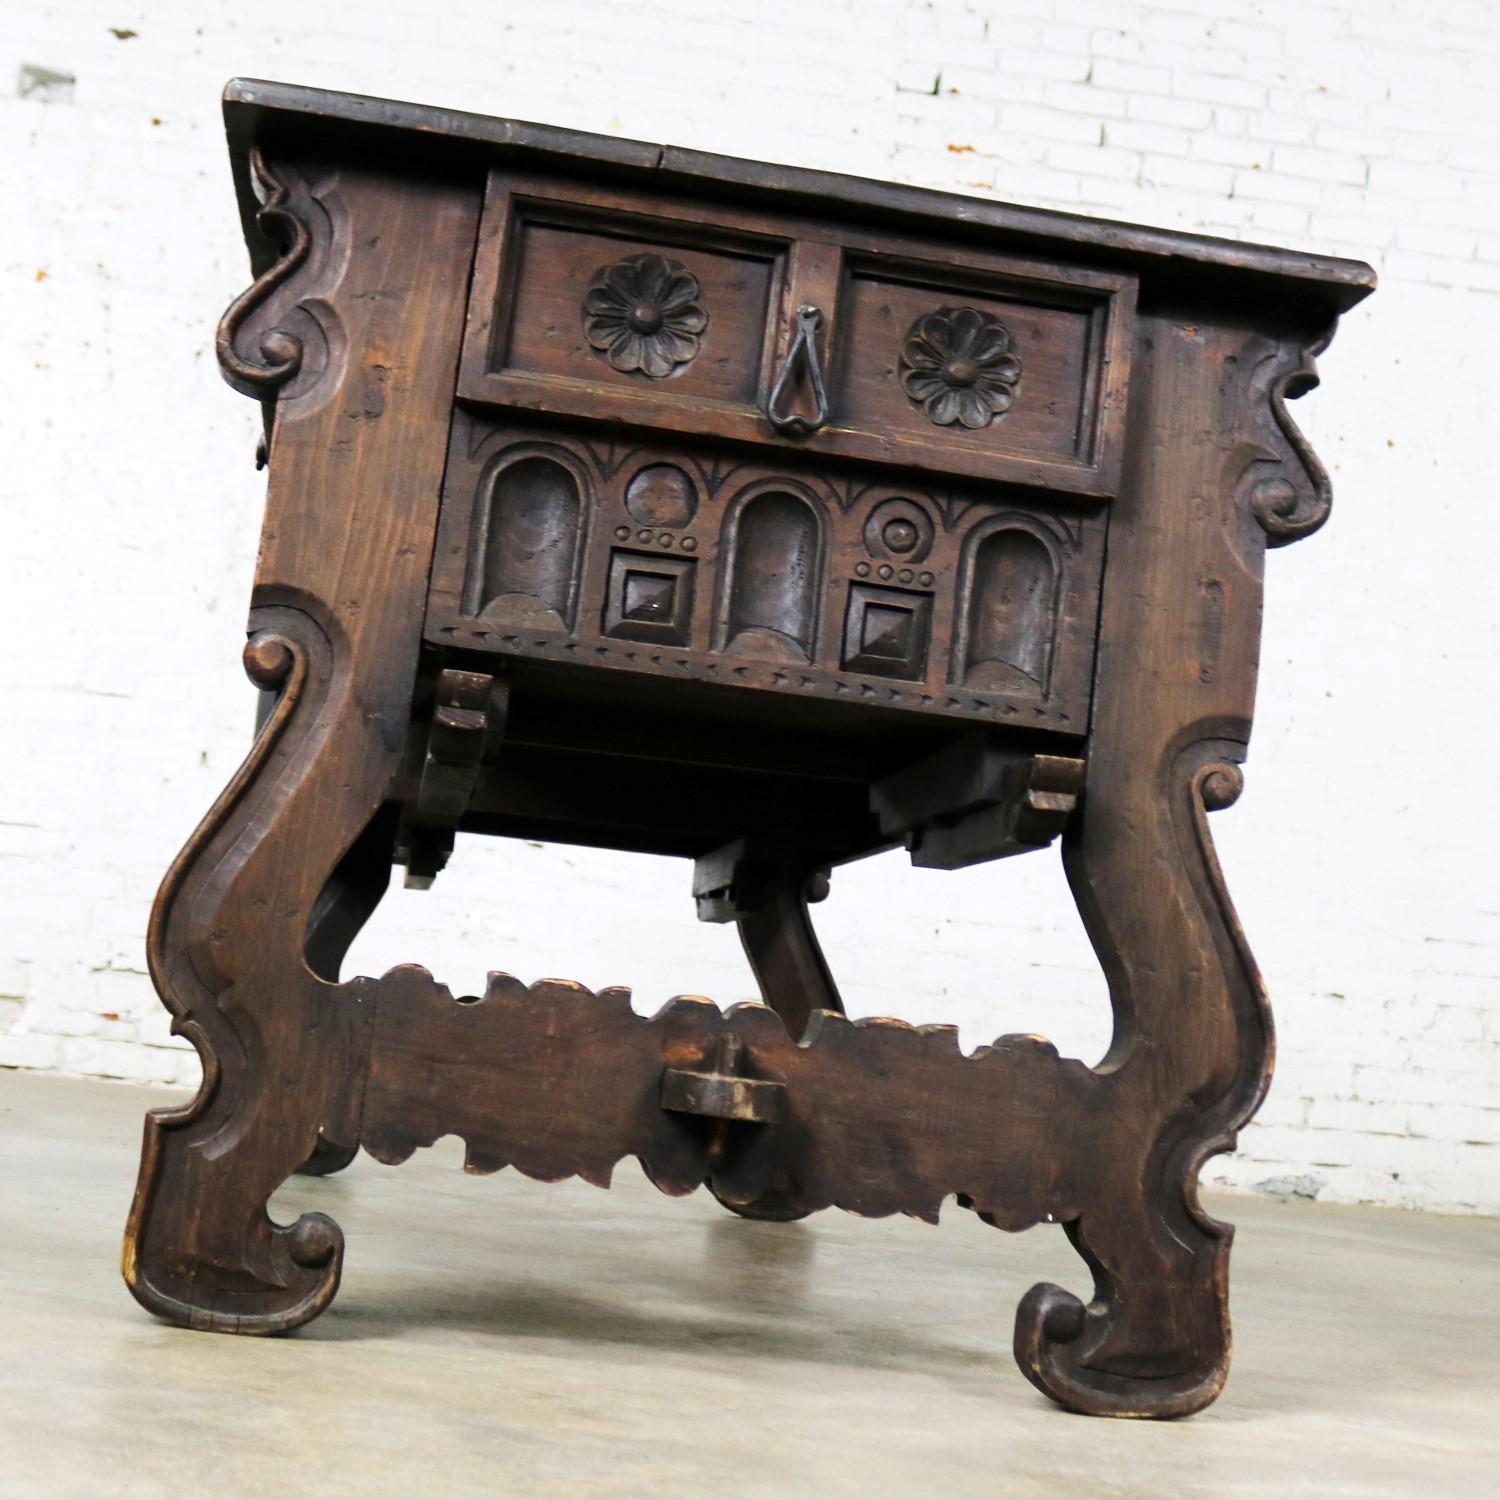 Wrought Iron Spanish Revival Style Desk with Handwrought Hardware by Artes De Mexico